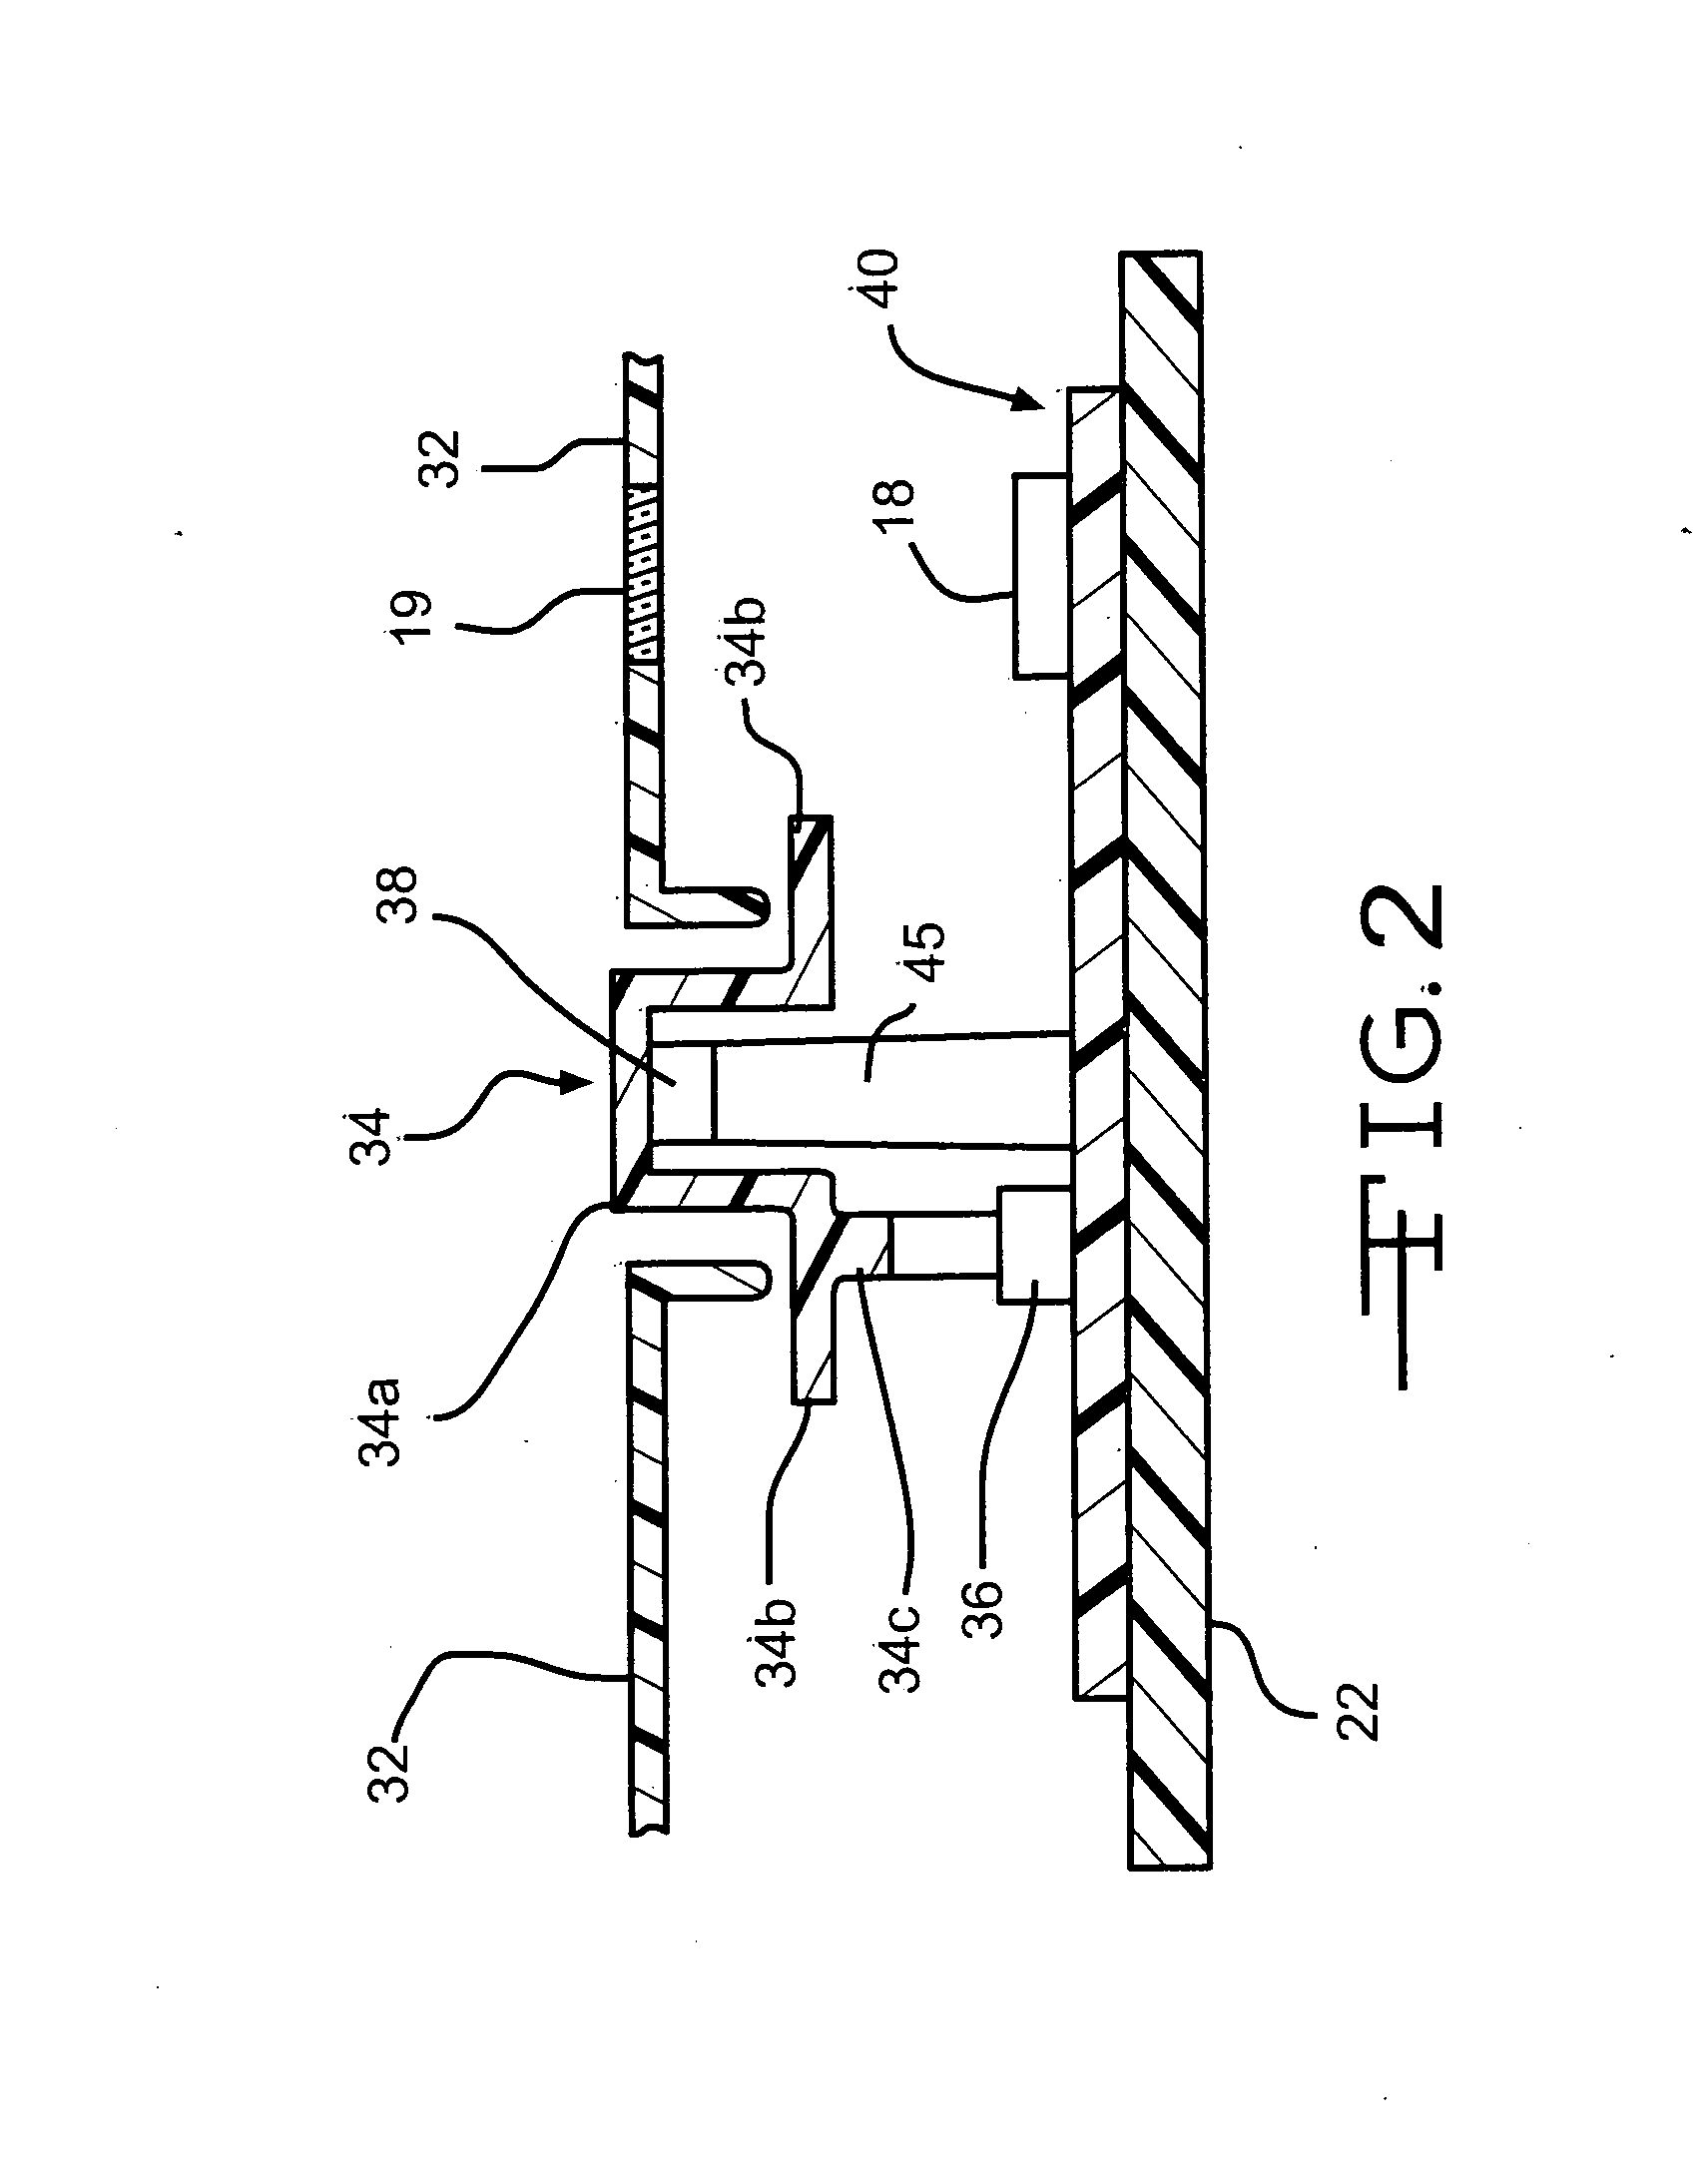 Multi-function control assembly